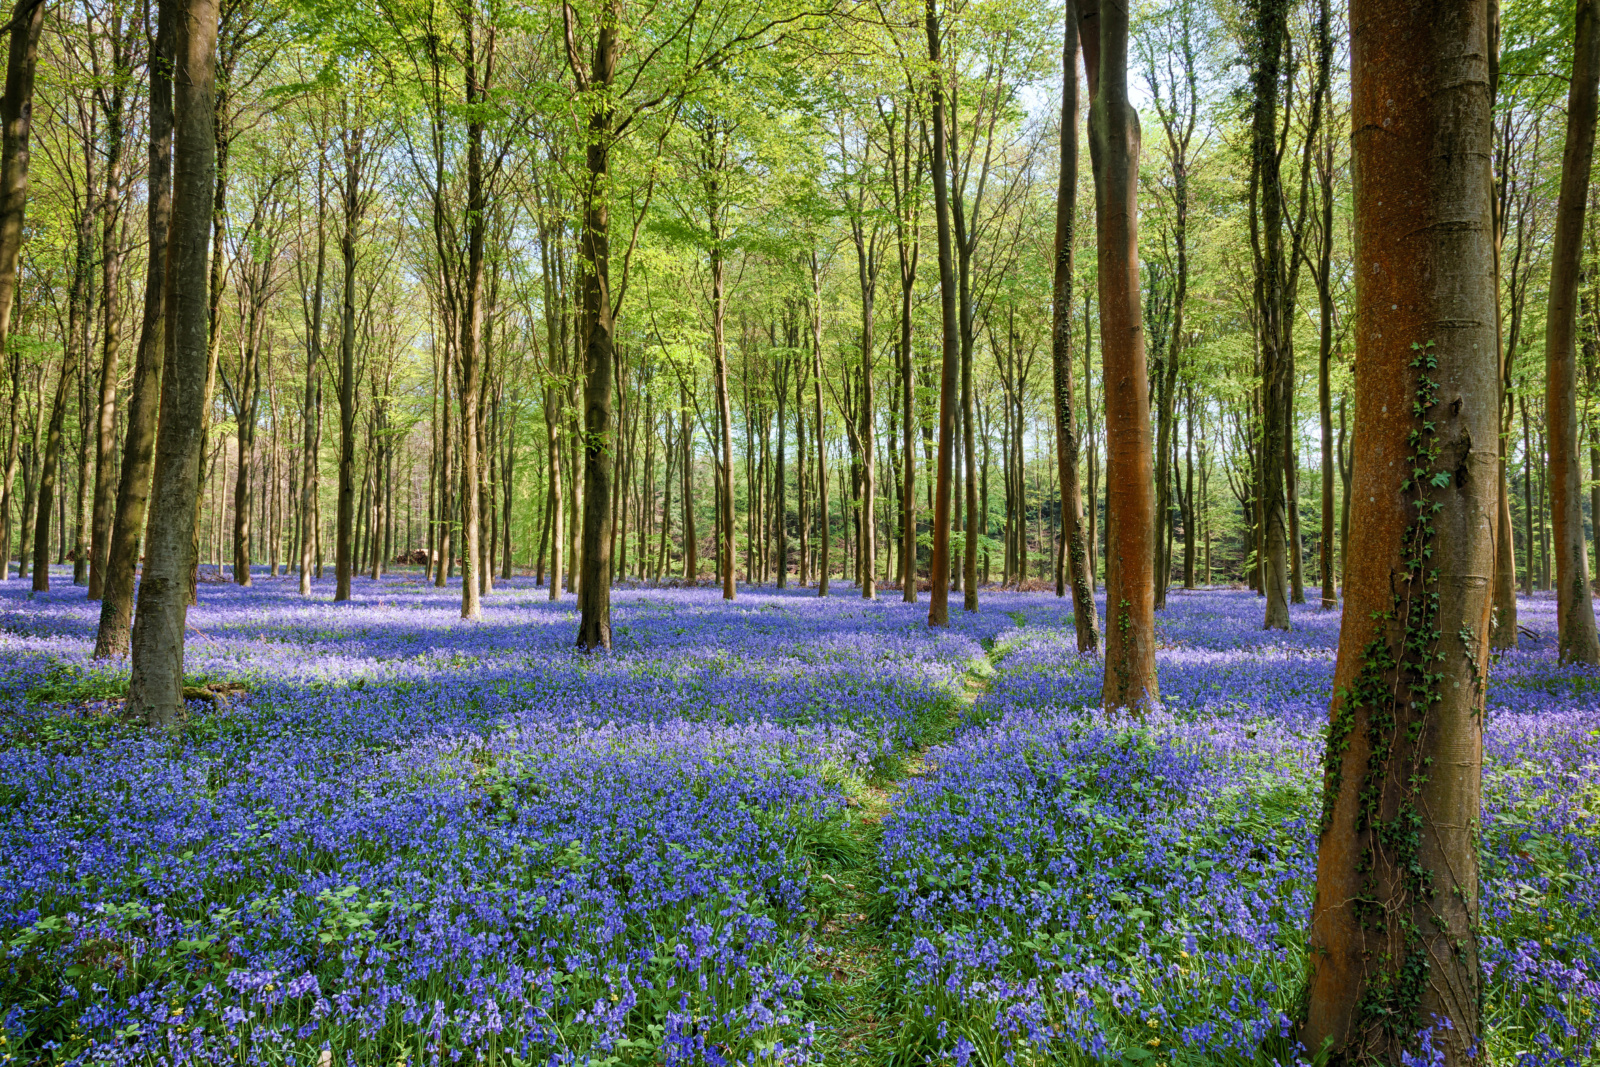 Bluebell woodland in England